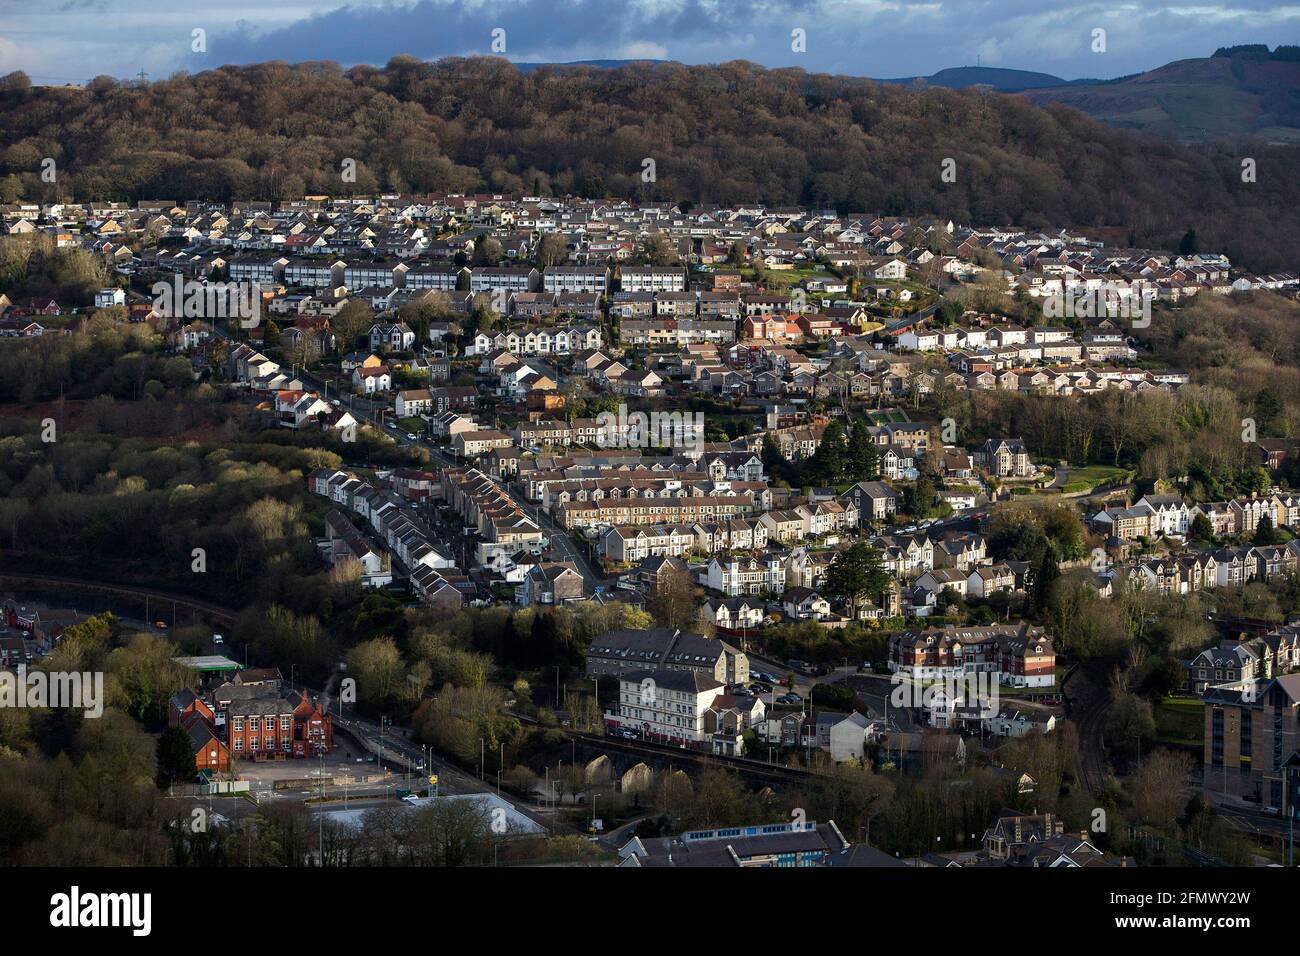 A general view of the town Pontypridd in the Rhondda Valleys, South Wales Stock Photo